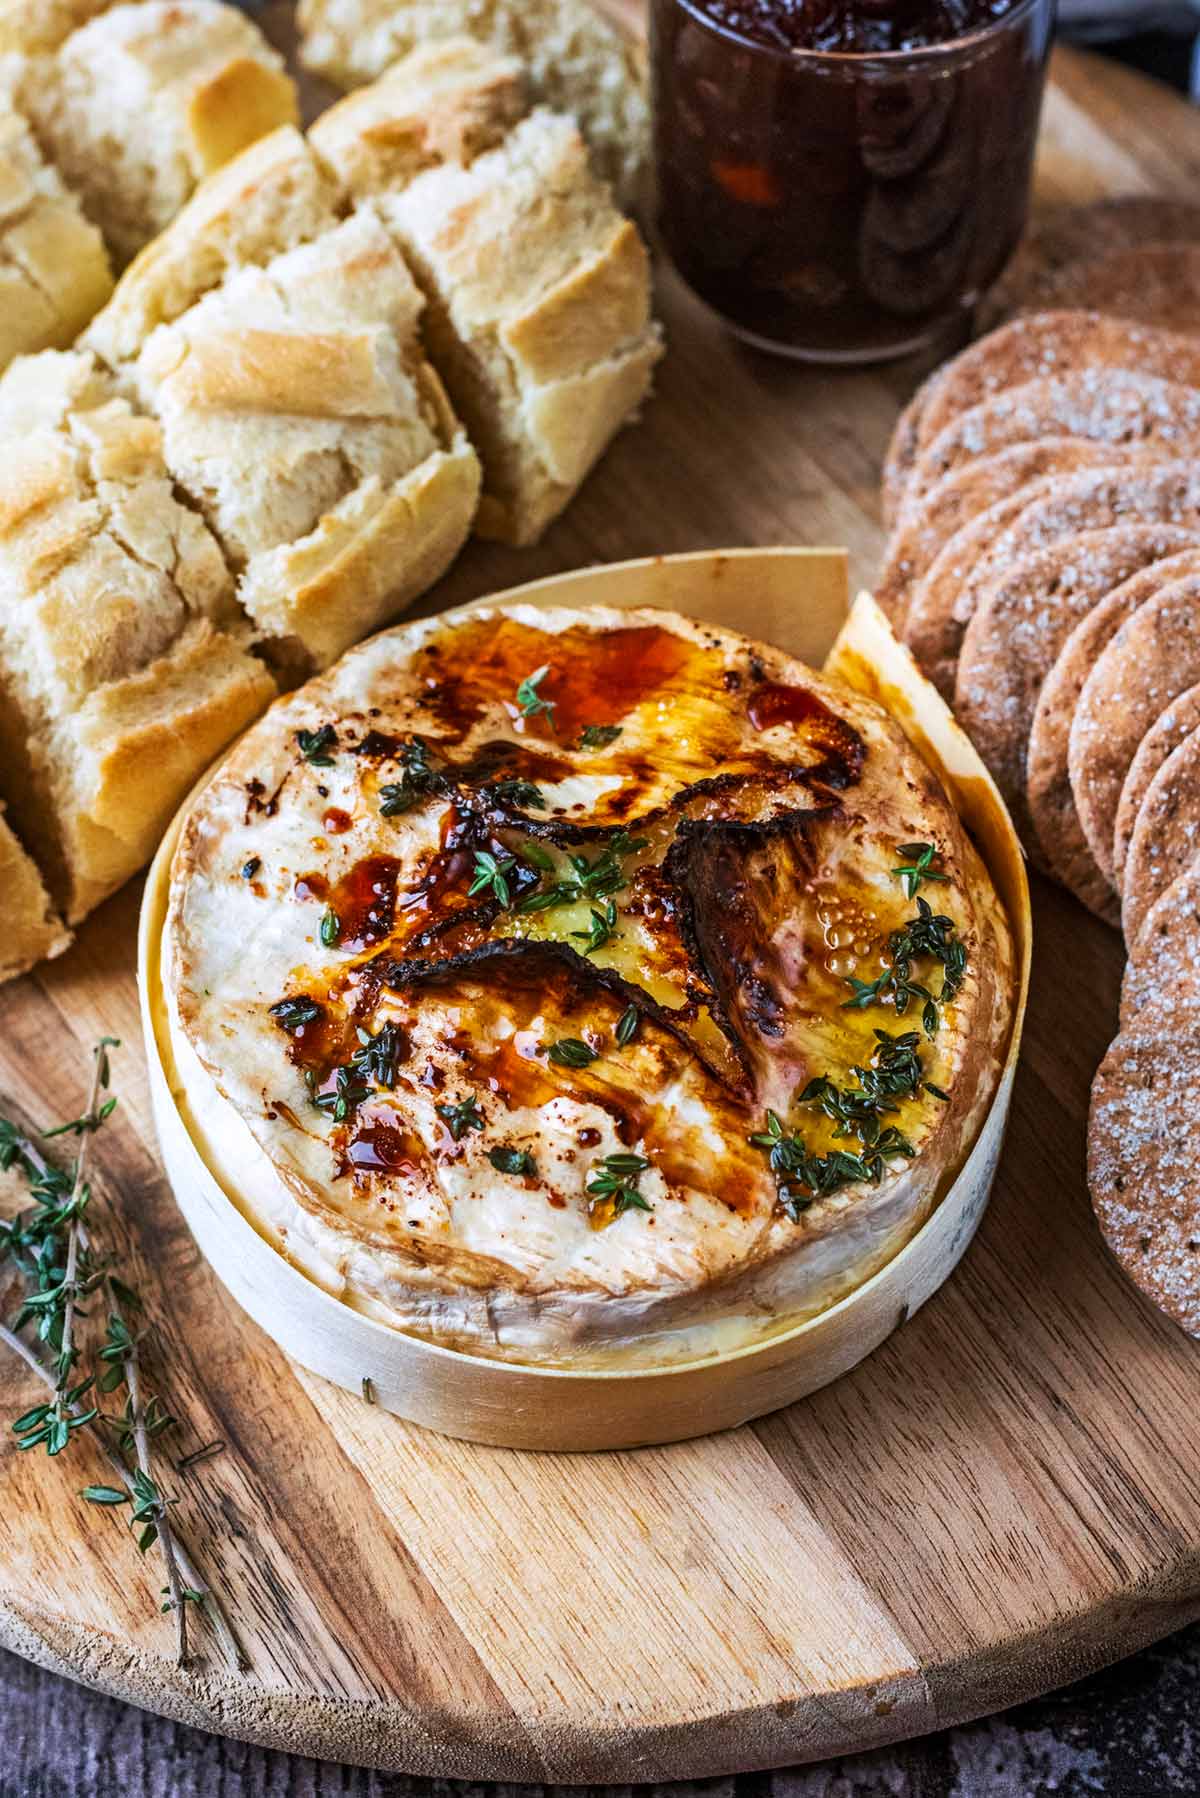 A round of baked Camembert on a board with slices of crusty bread and some crackers.